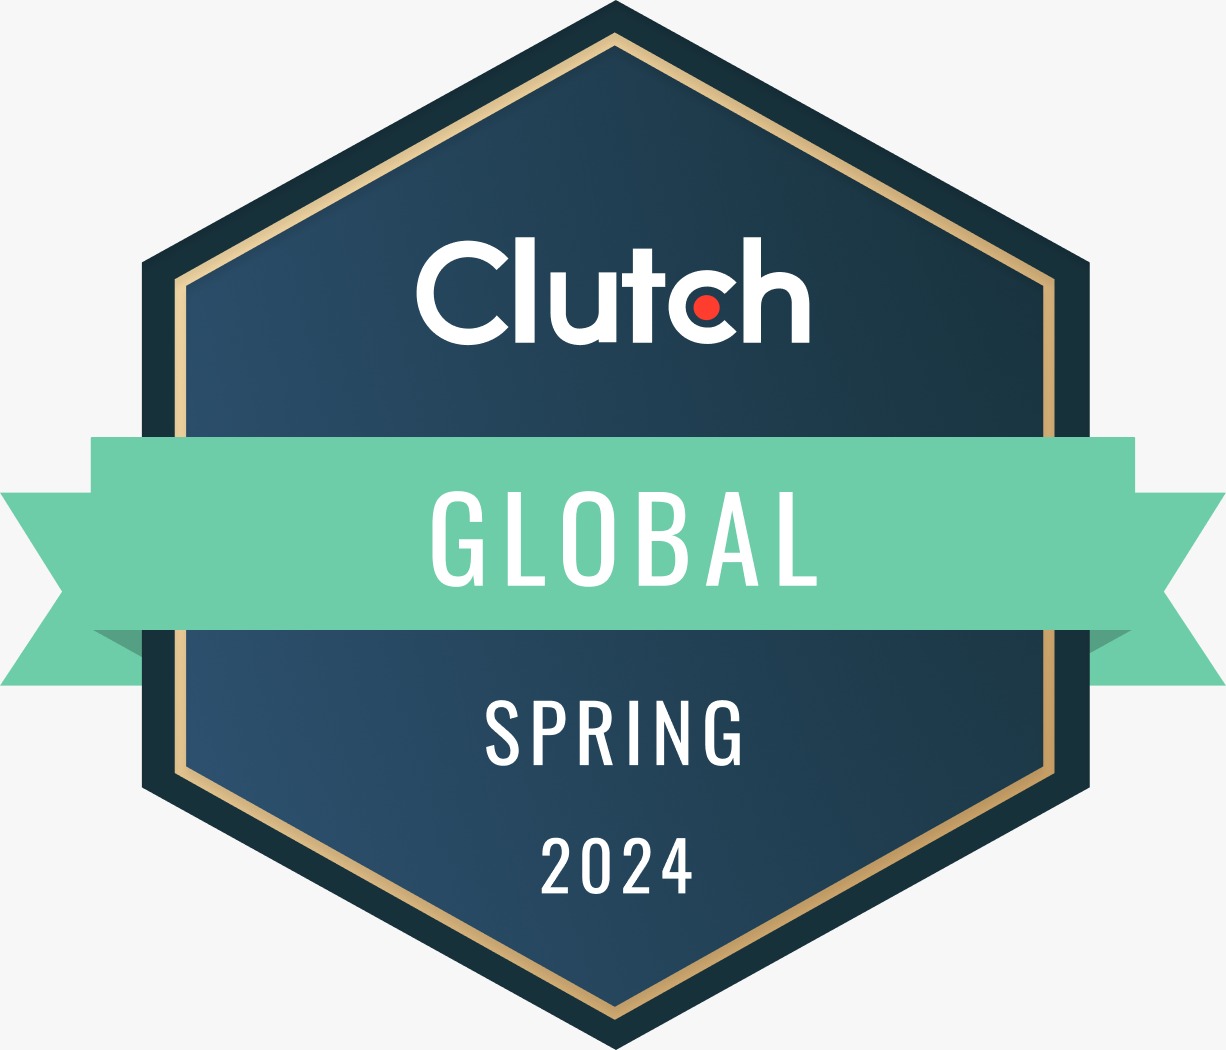 taction-clutch-top-global-software-development-company